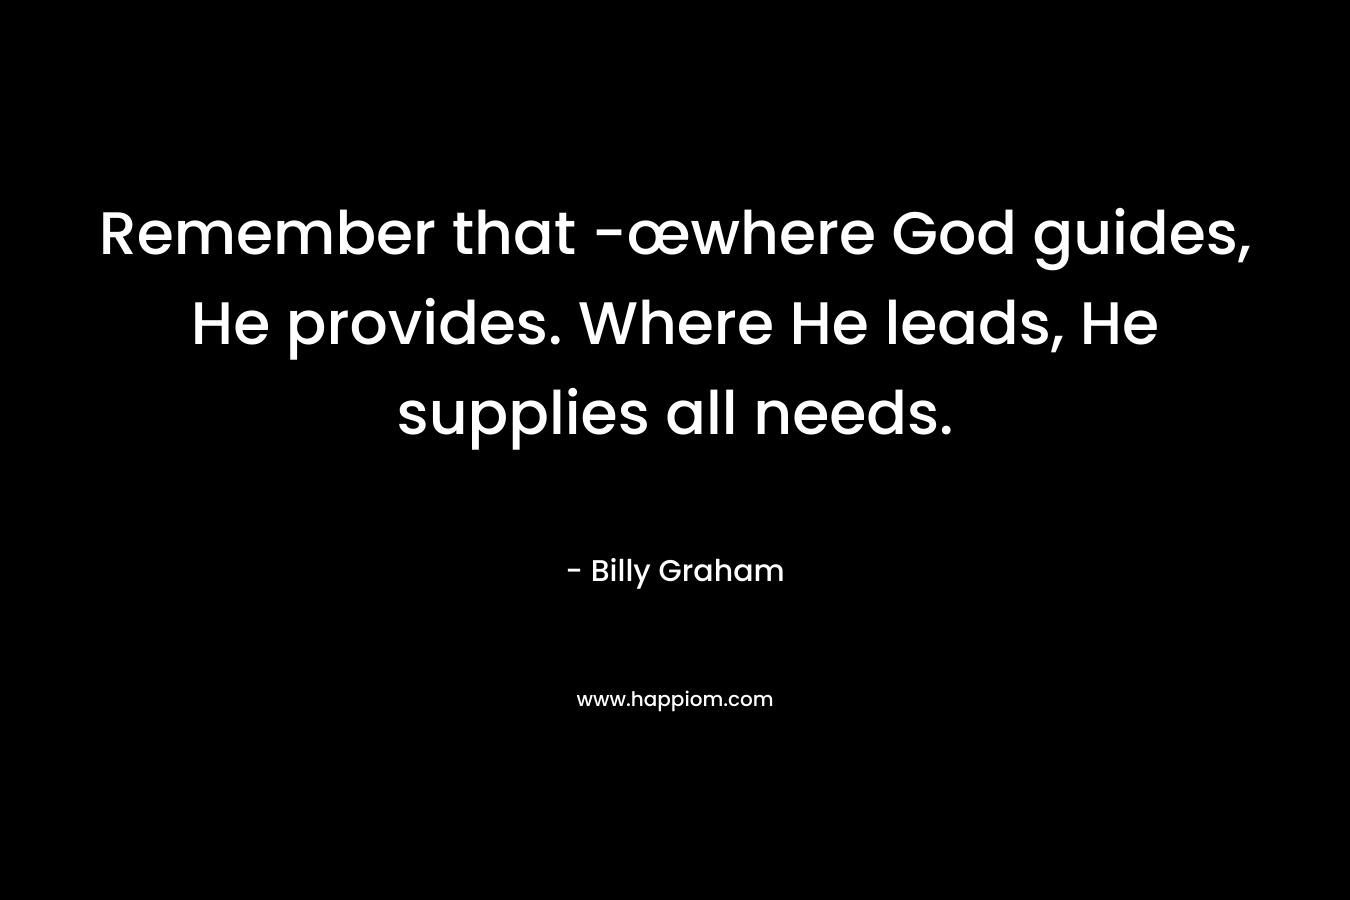 Remember that -œwhere God guides, He provides. Where He leads, He supplies all needs. – Billy Graham